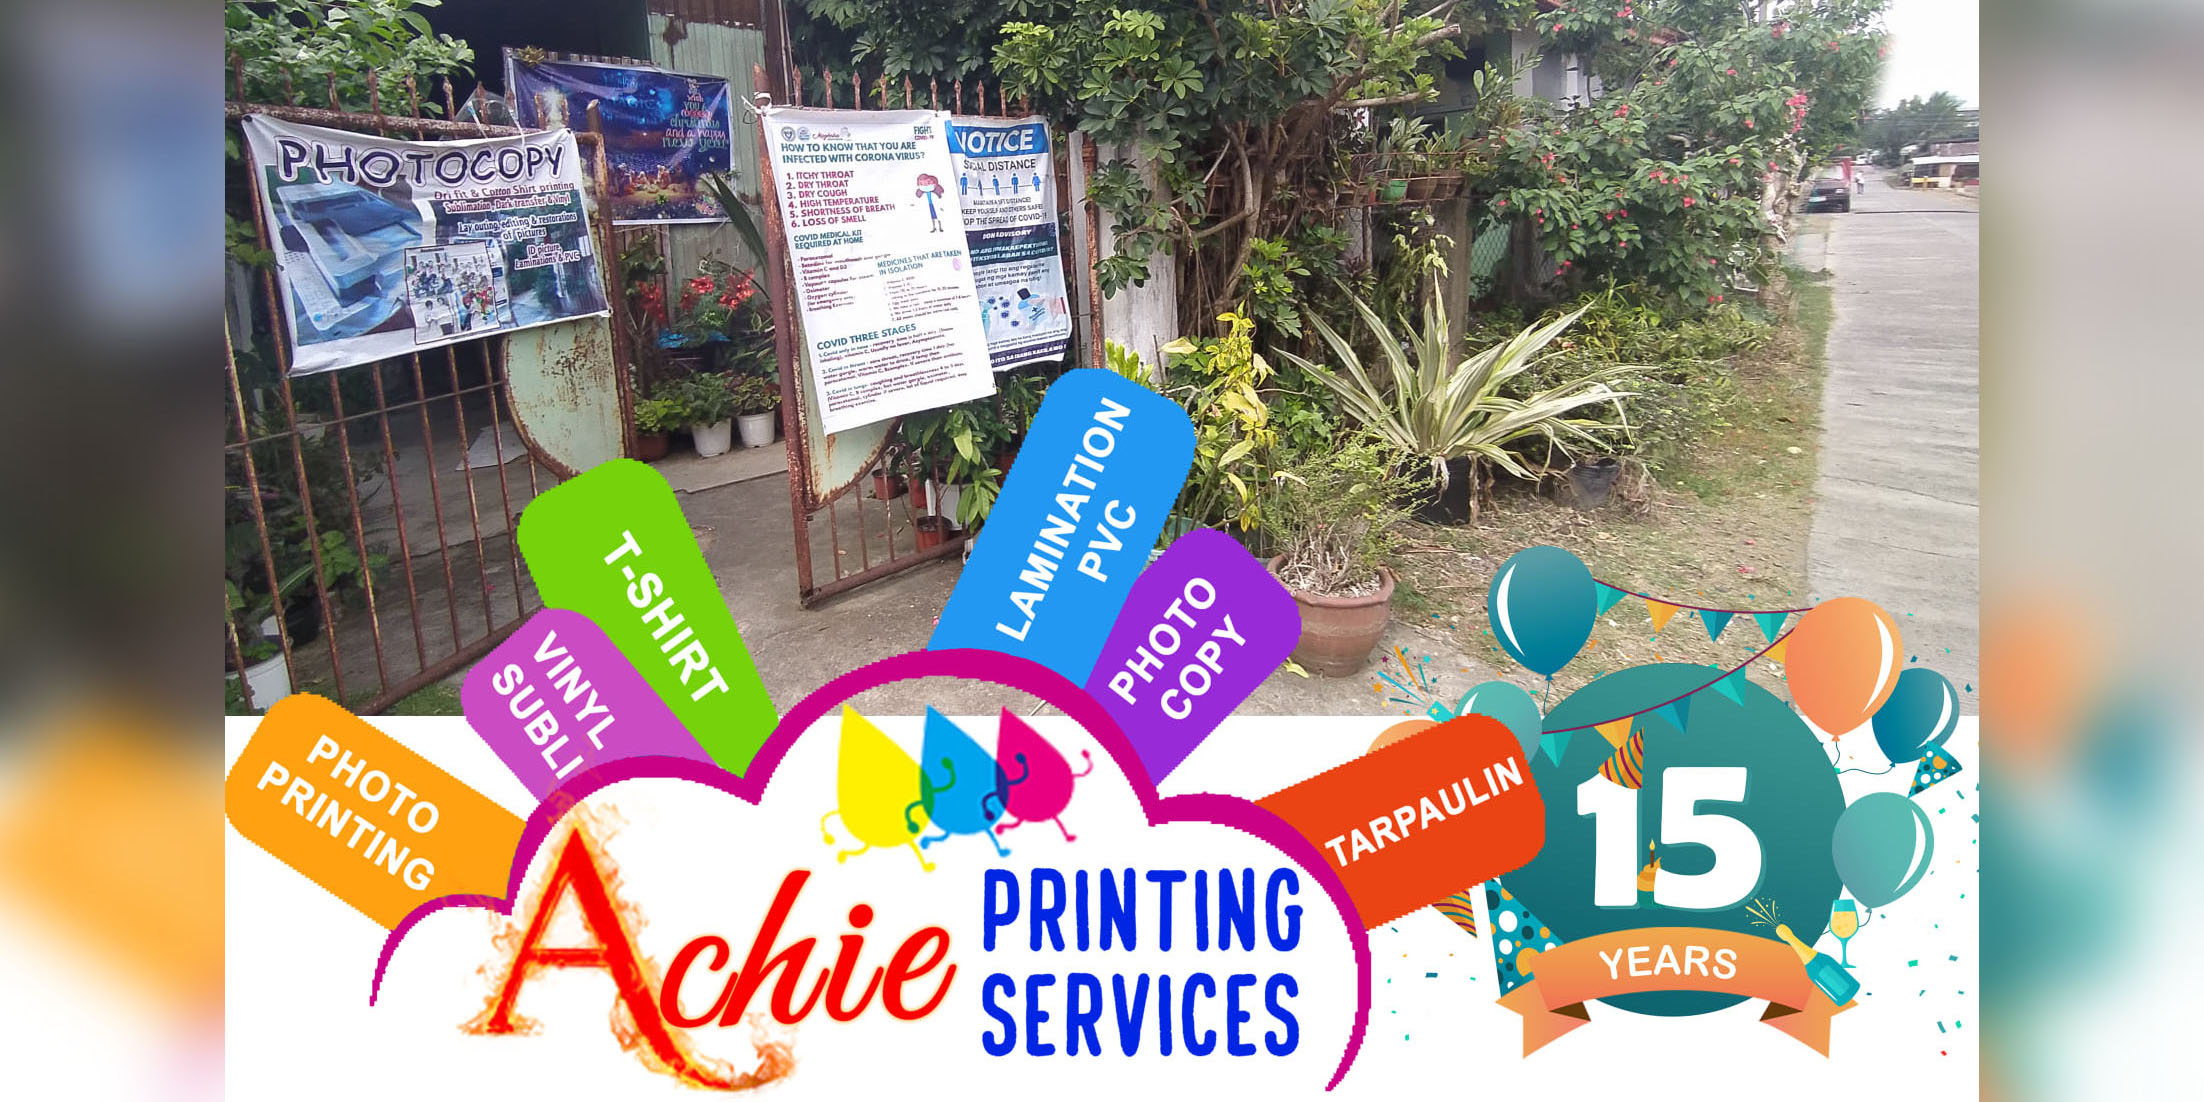 picture of Achie's Printing services